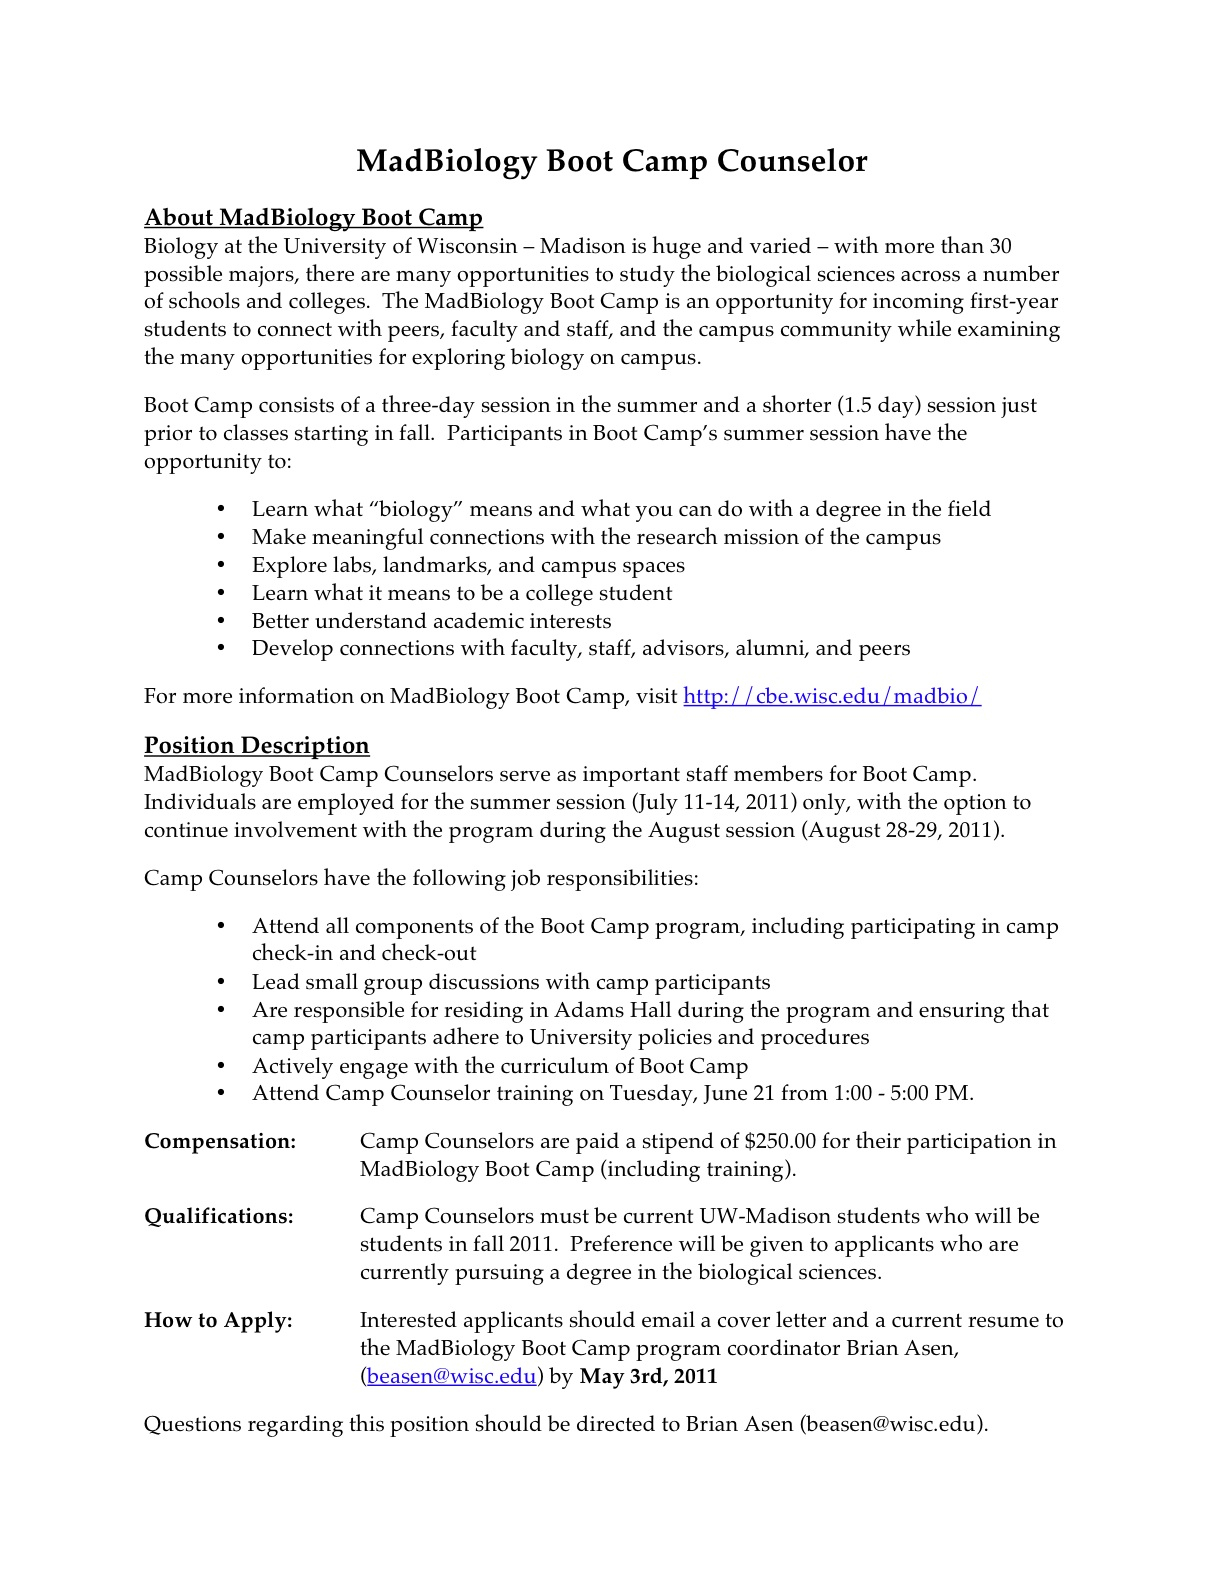 Summer Camp Letter to Parents Template - Ideas Sample Camp Counselor Resume for Your Free Gallery Resumes